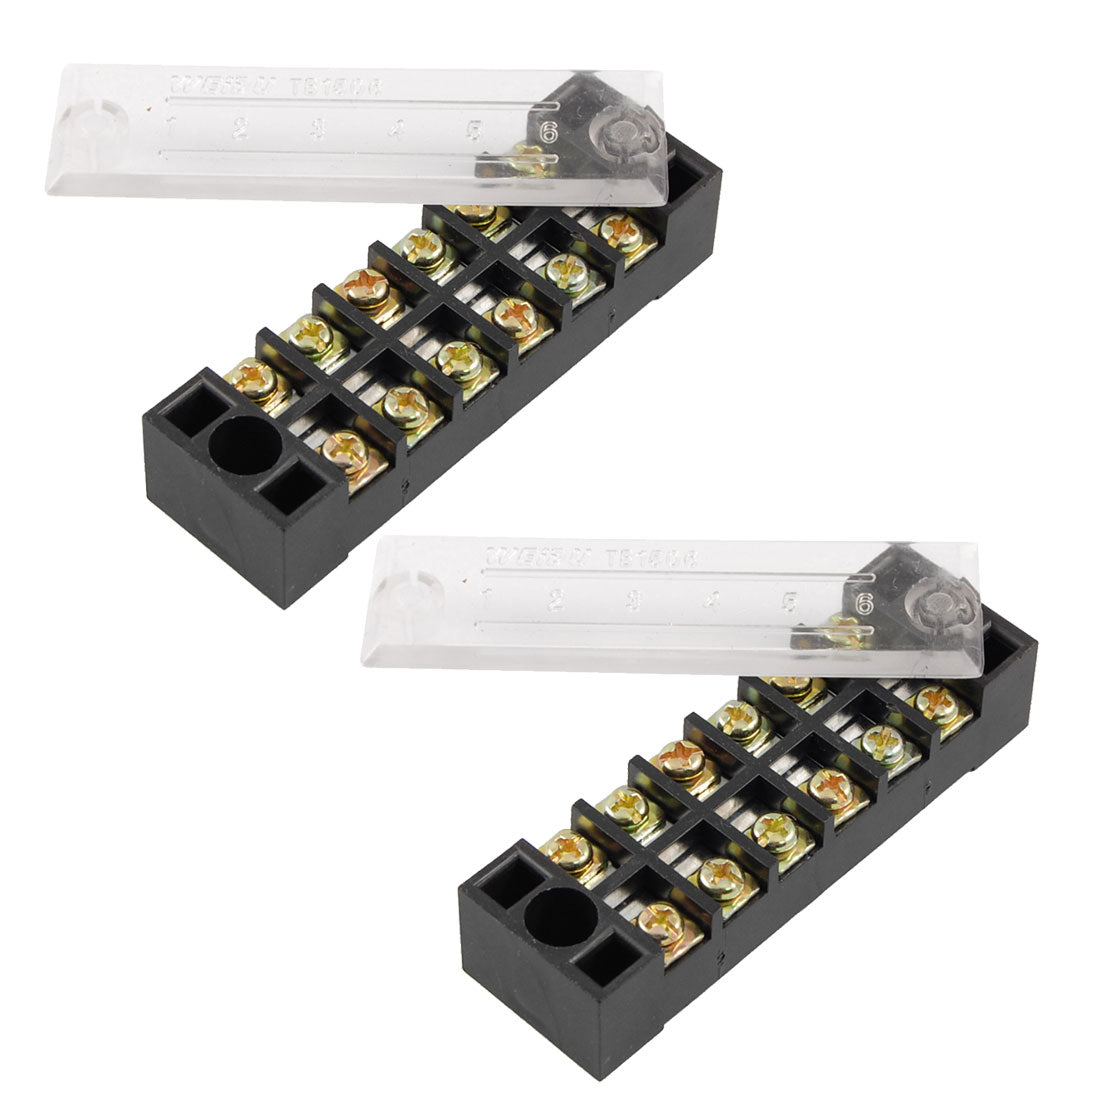 uxcell Uxcell 600V 15A 6 Position Wiring Terminal Blocks Barrier 2 Pcs